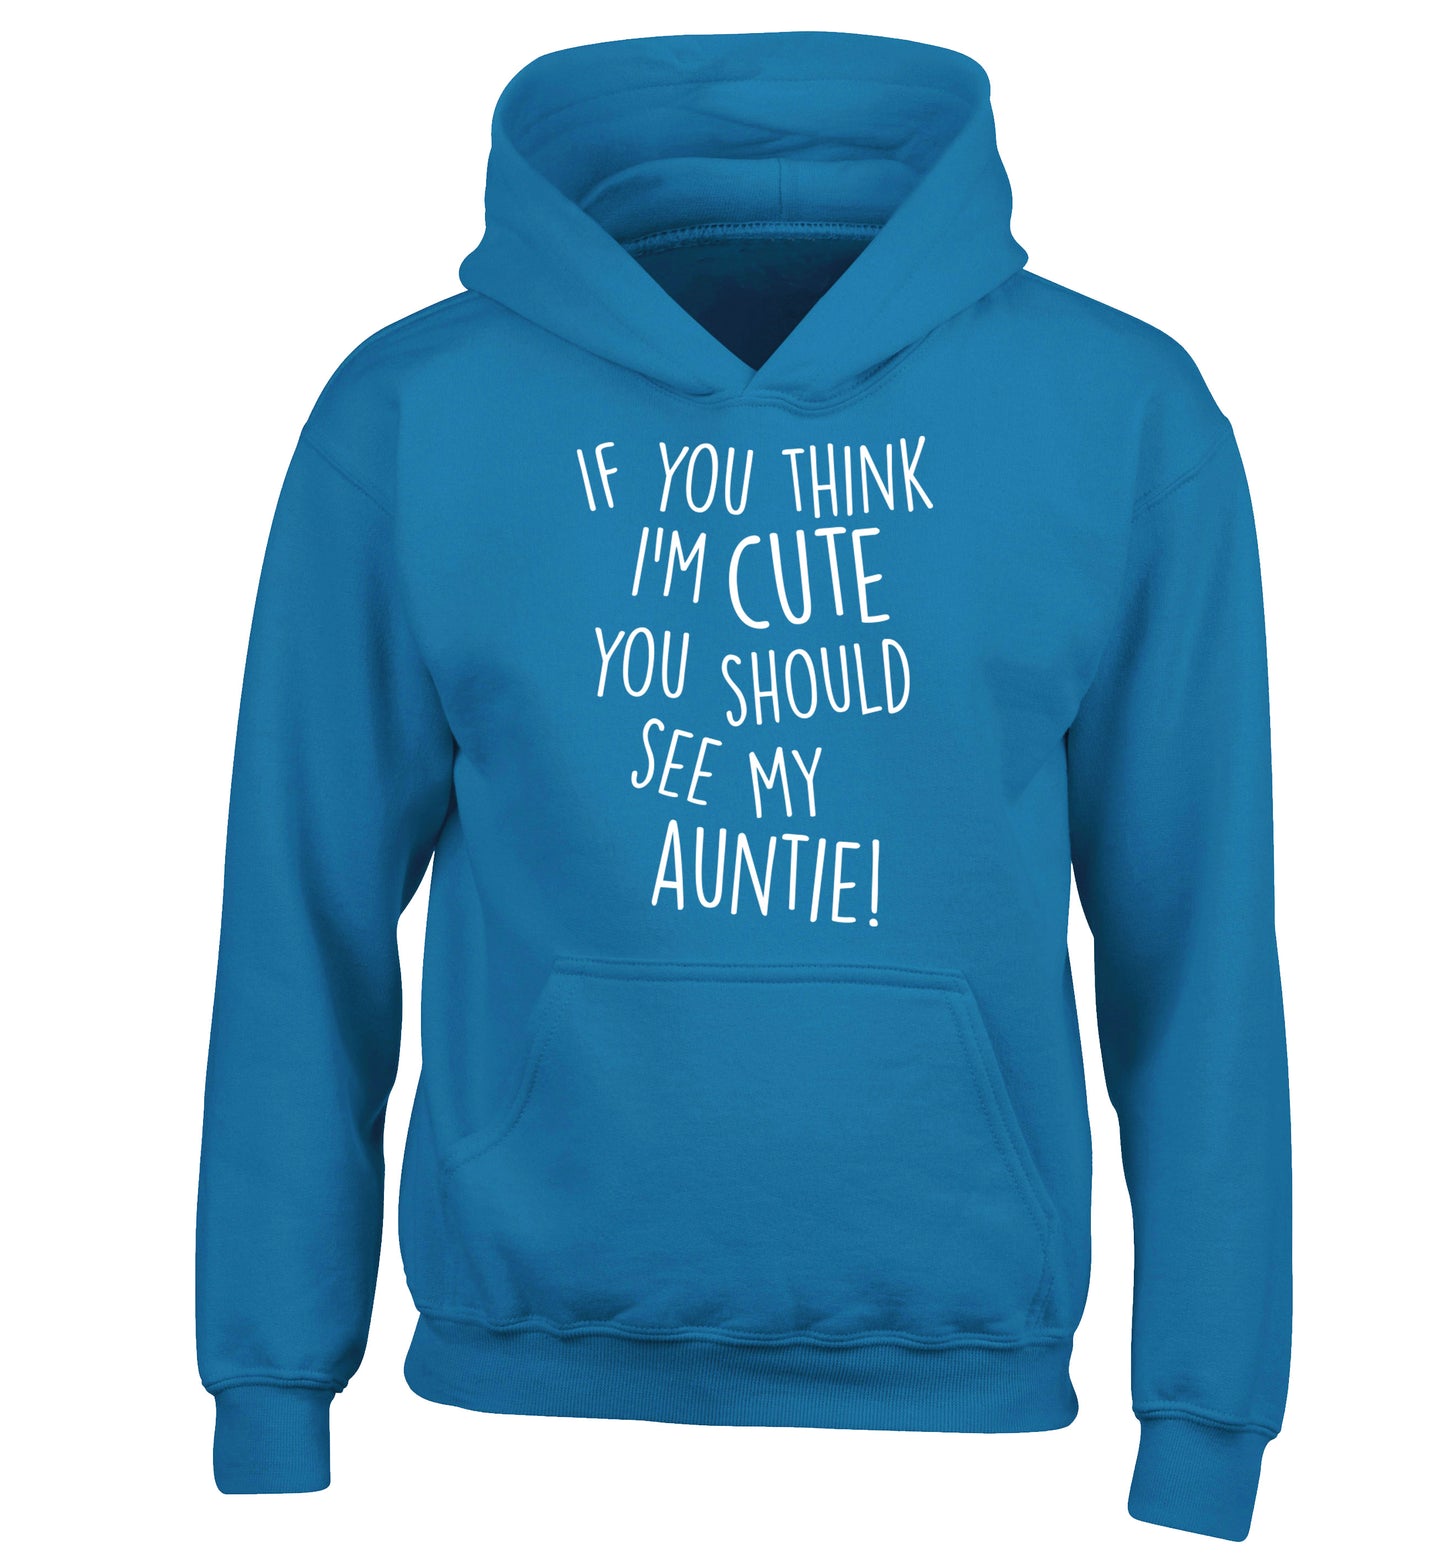 If you think I'm cute you should see my auntie children's blue hoodie 12-14 Years